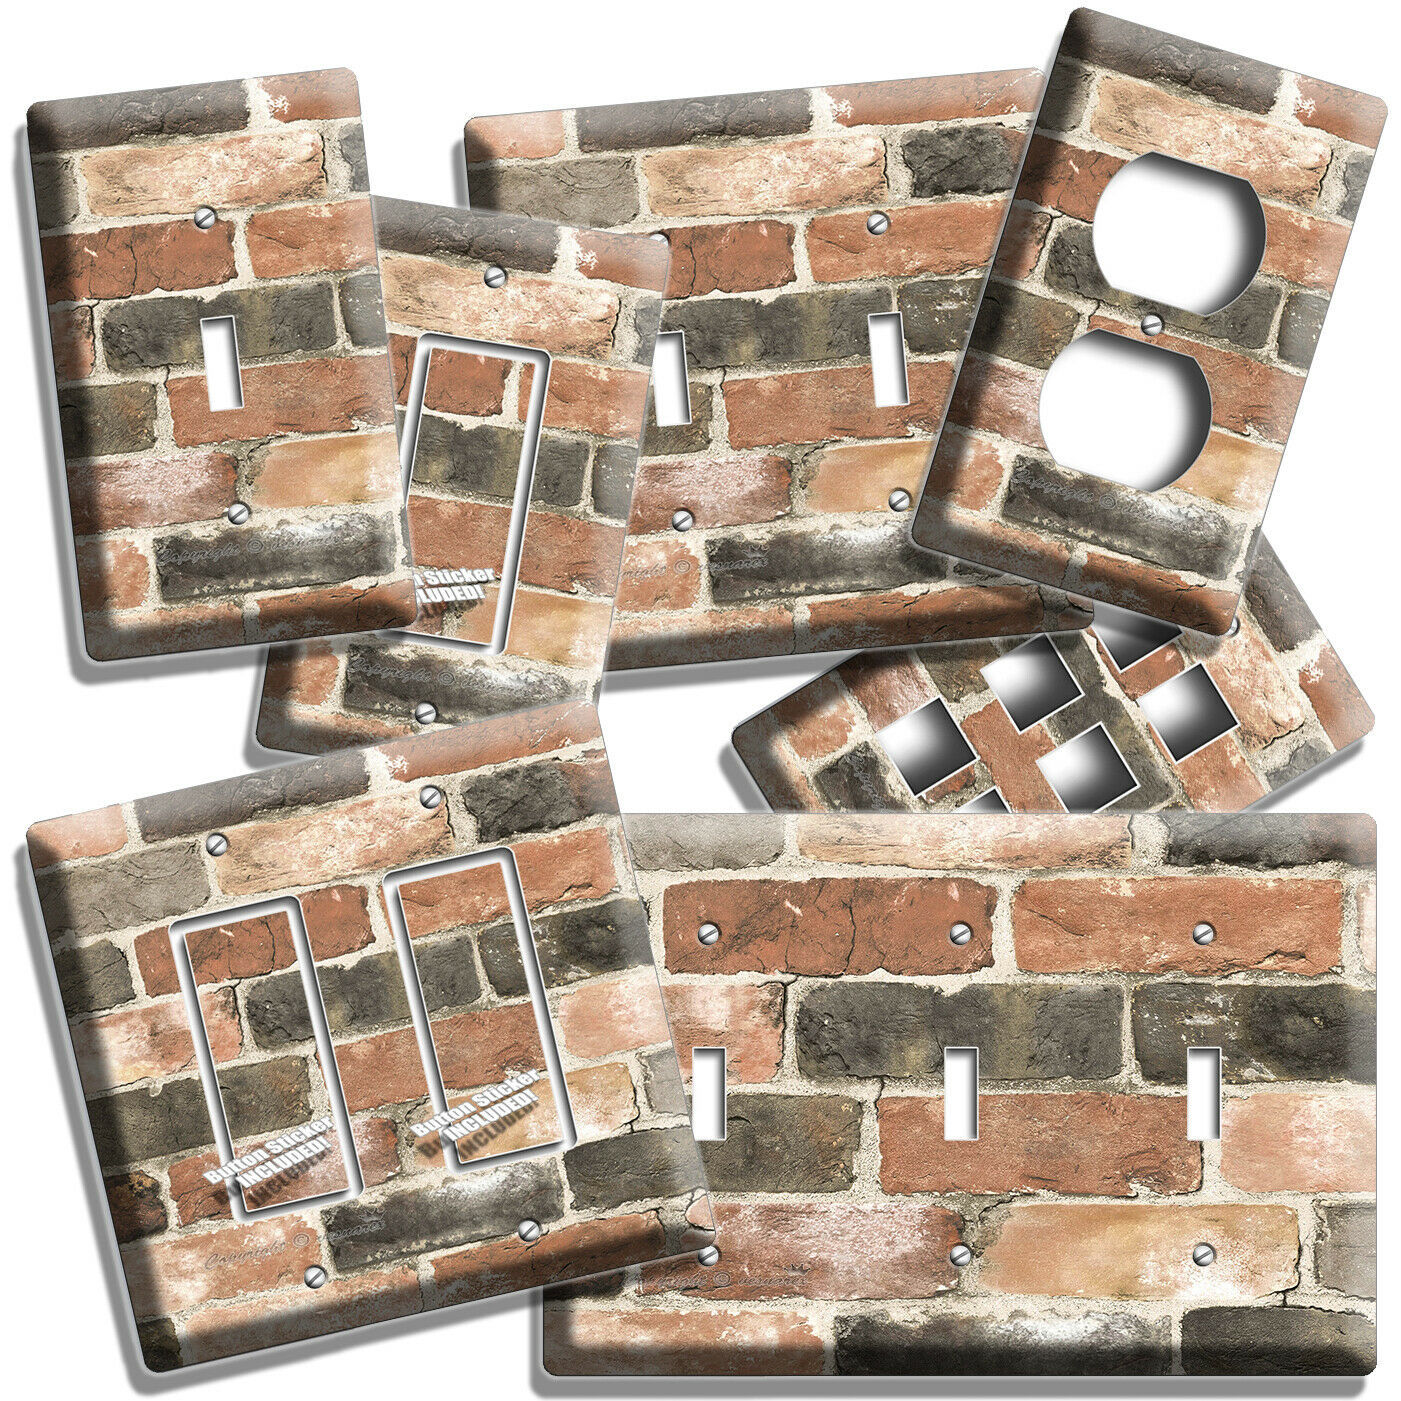 Primary image for RUSTIC RECLAIMED WORN OUT BRICK WALL LIGHT SWITCH OUTLET PLATES ROOM HOME DECOR